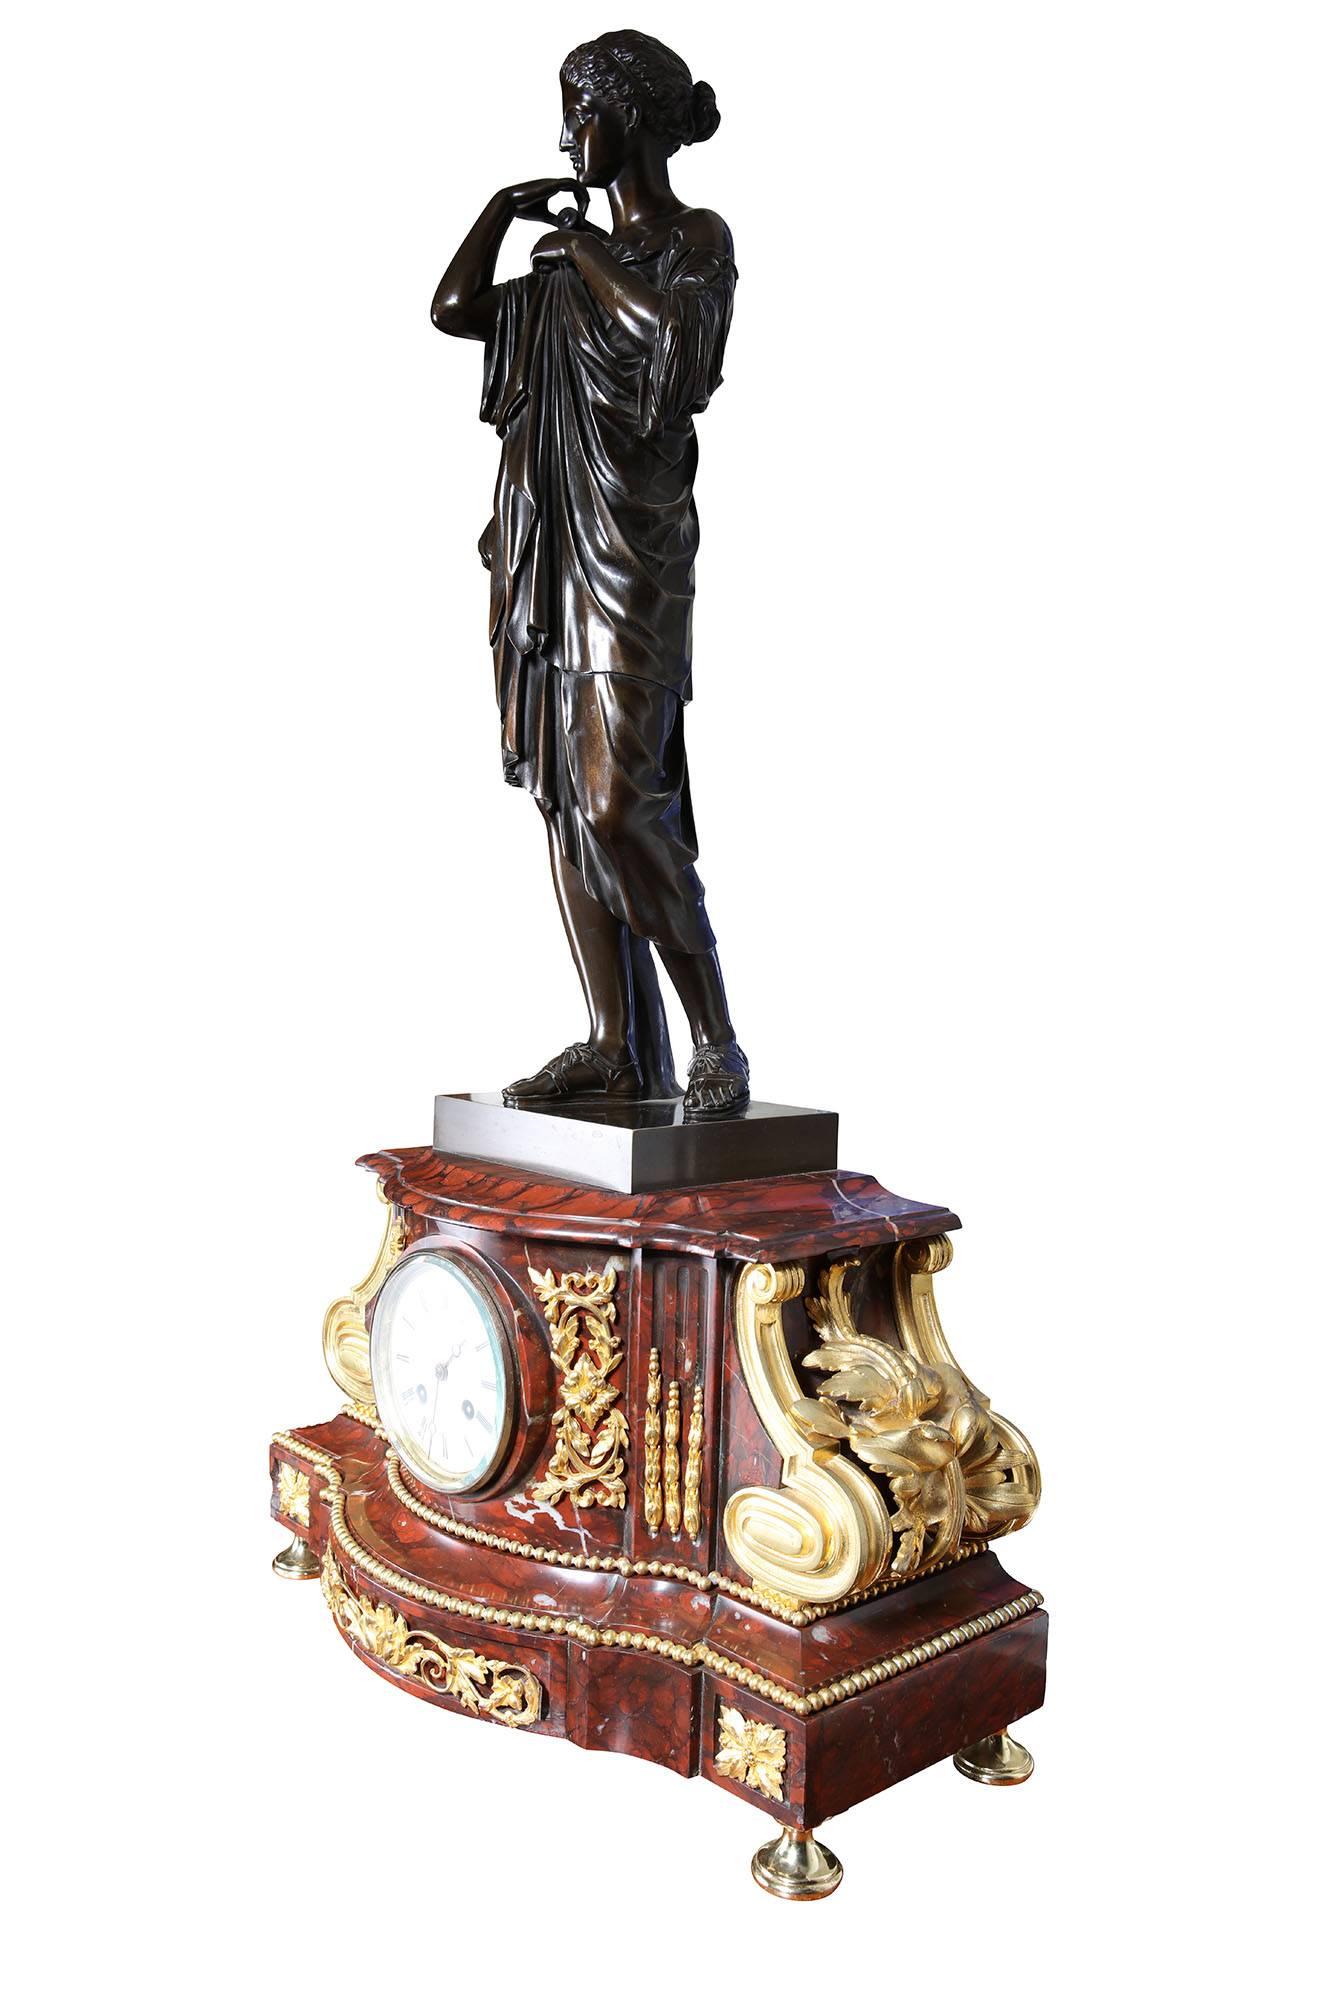 French 19th Century Bronze and Rouge Marble Mantle Clock In Excellent Condition In London, by appointment only